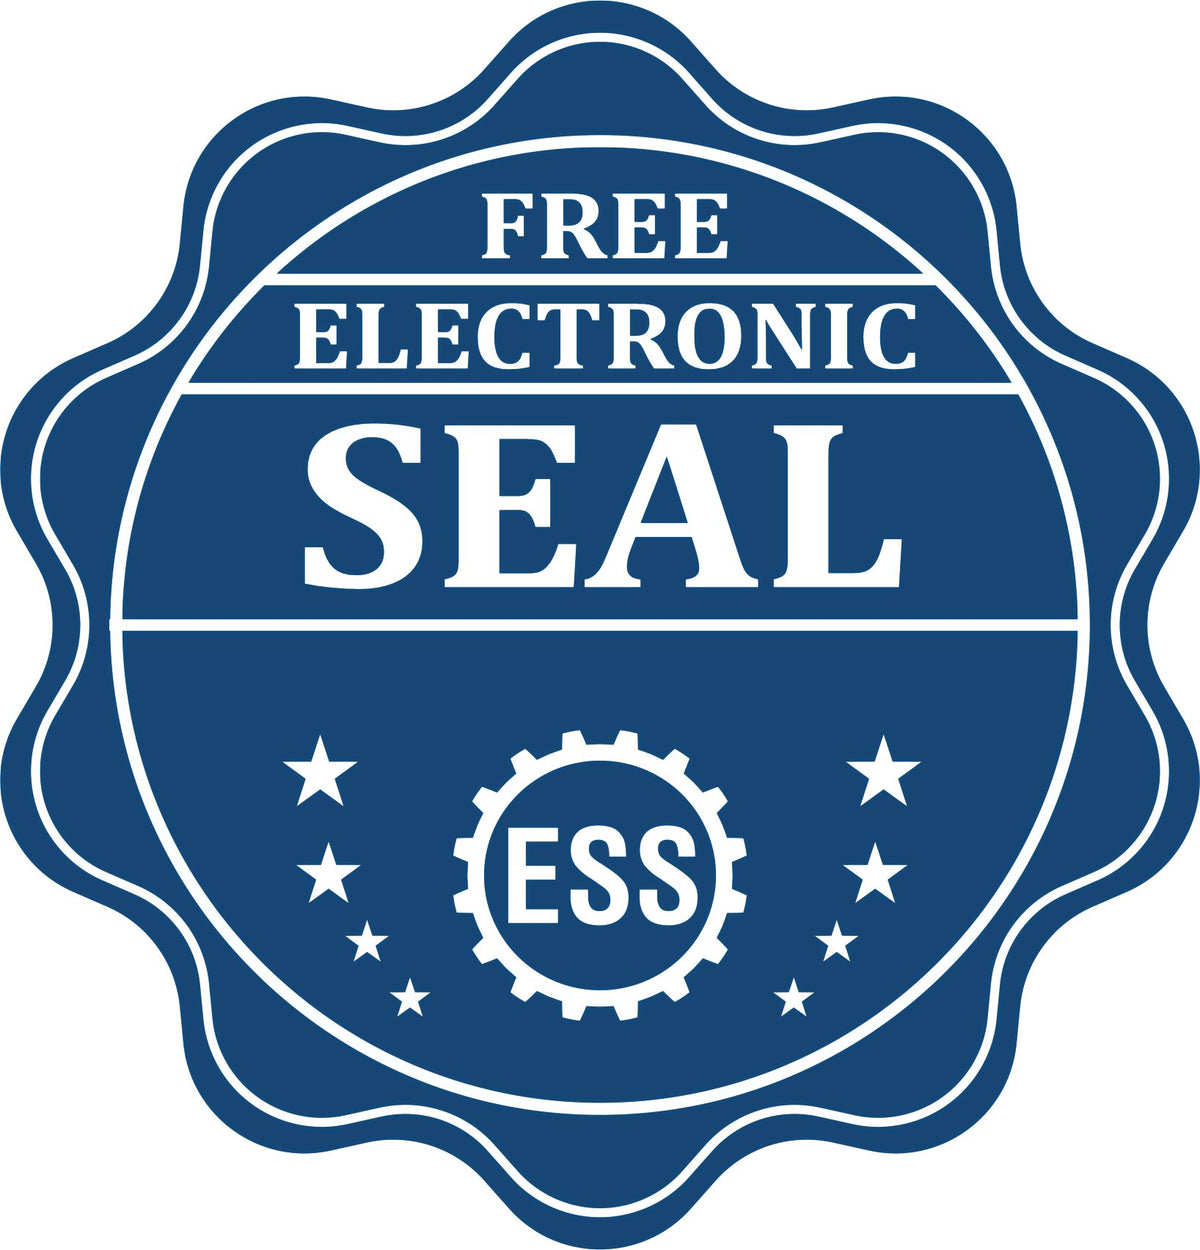 A badge showing a free electronic seal for the Gift Guam Land Surveyor Seal with stars and the ESS gear on the emblem.